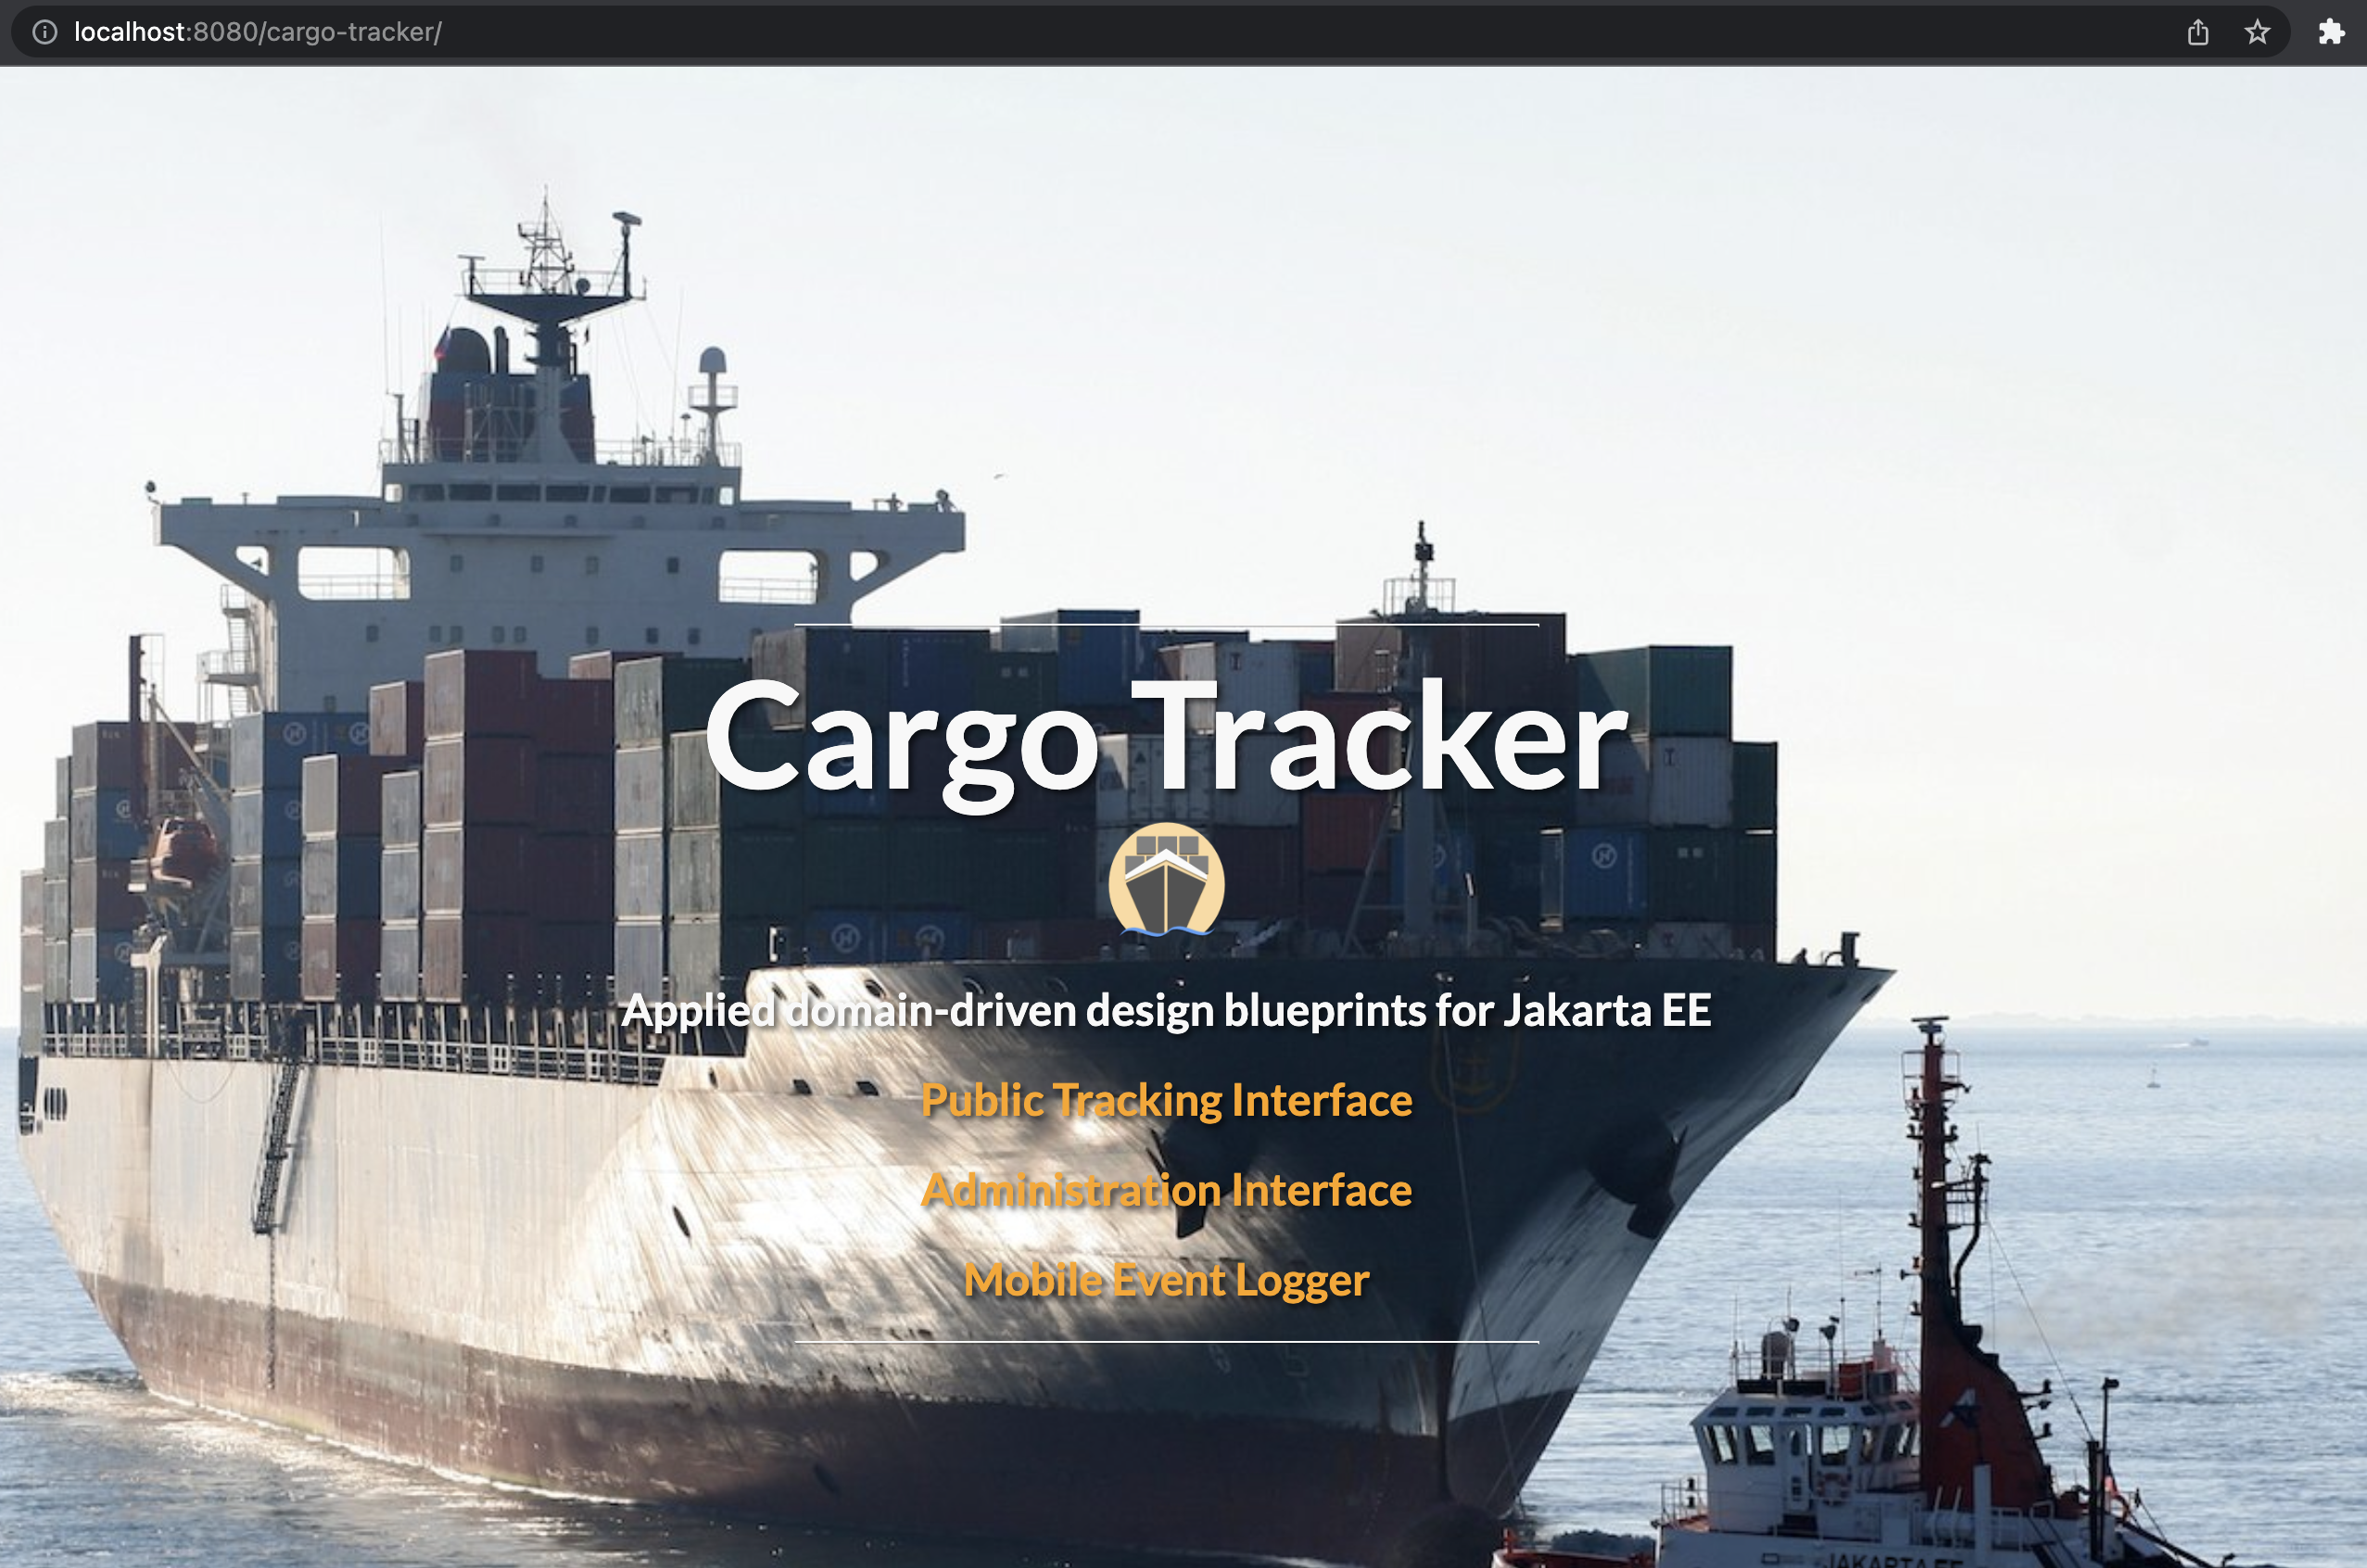 Cargo Tracker Home Page